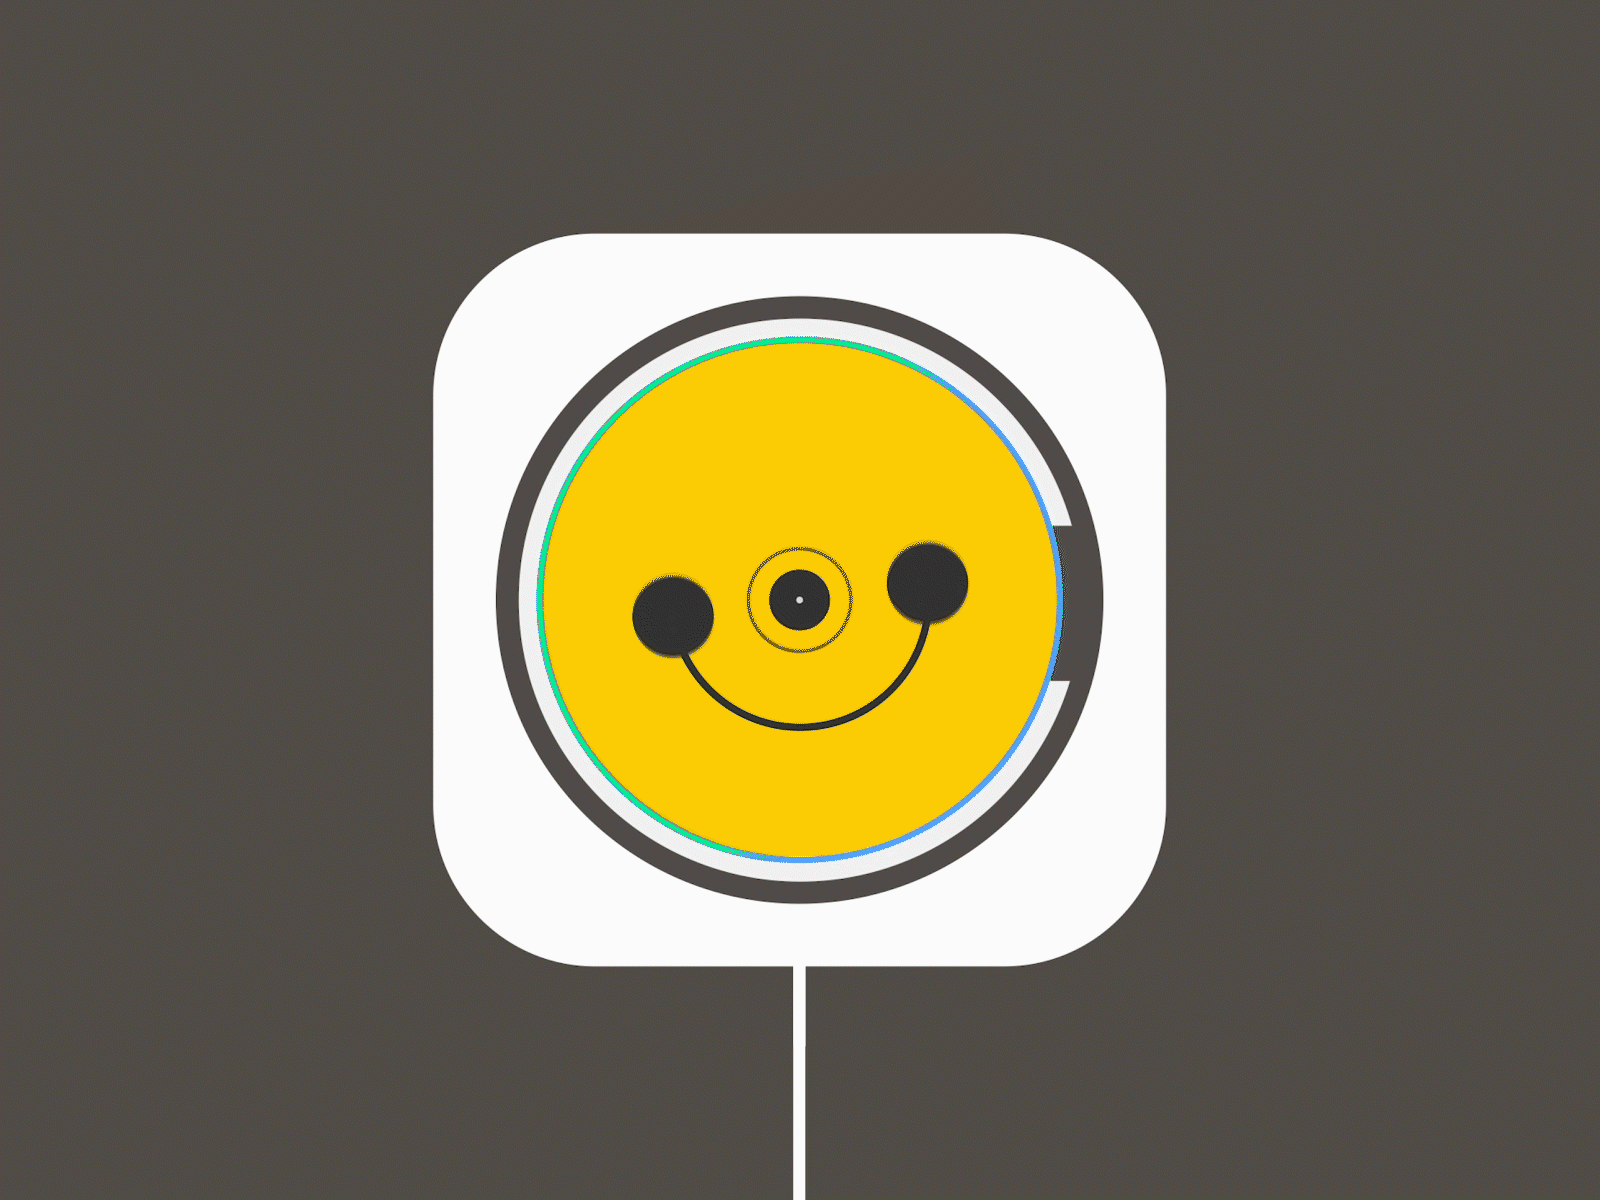 Happy Point Positive Vibes Video adobe after effects adobe illustration animation covid 19 cute illustration fun art fun video funny good vibes graphic design happy faces interesting motion design motion graphics optimistic pandemic positive vibes smiles smiley face video production